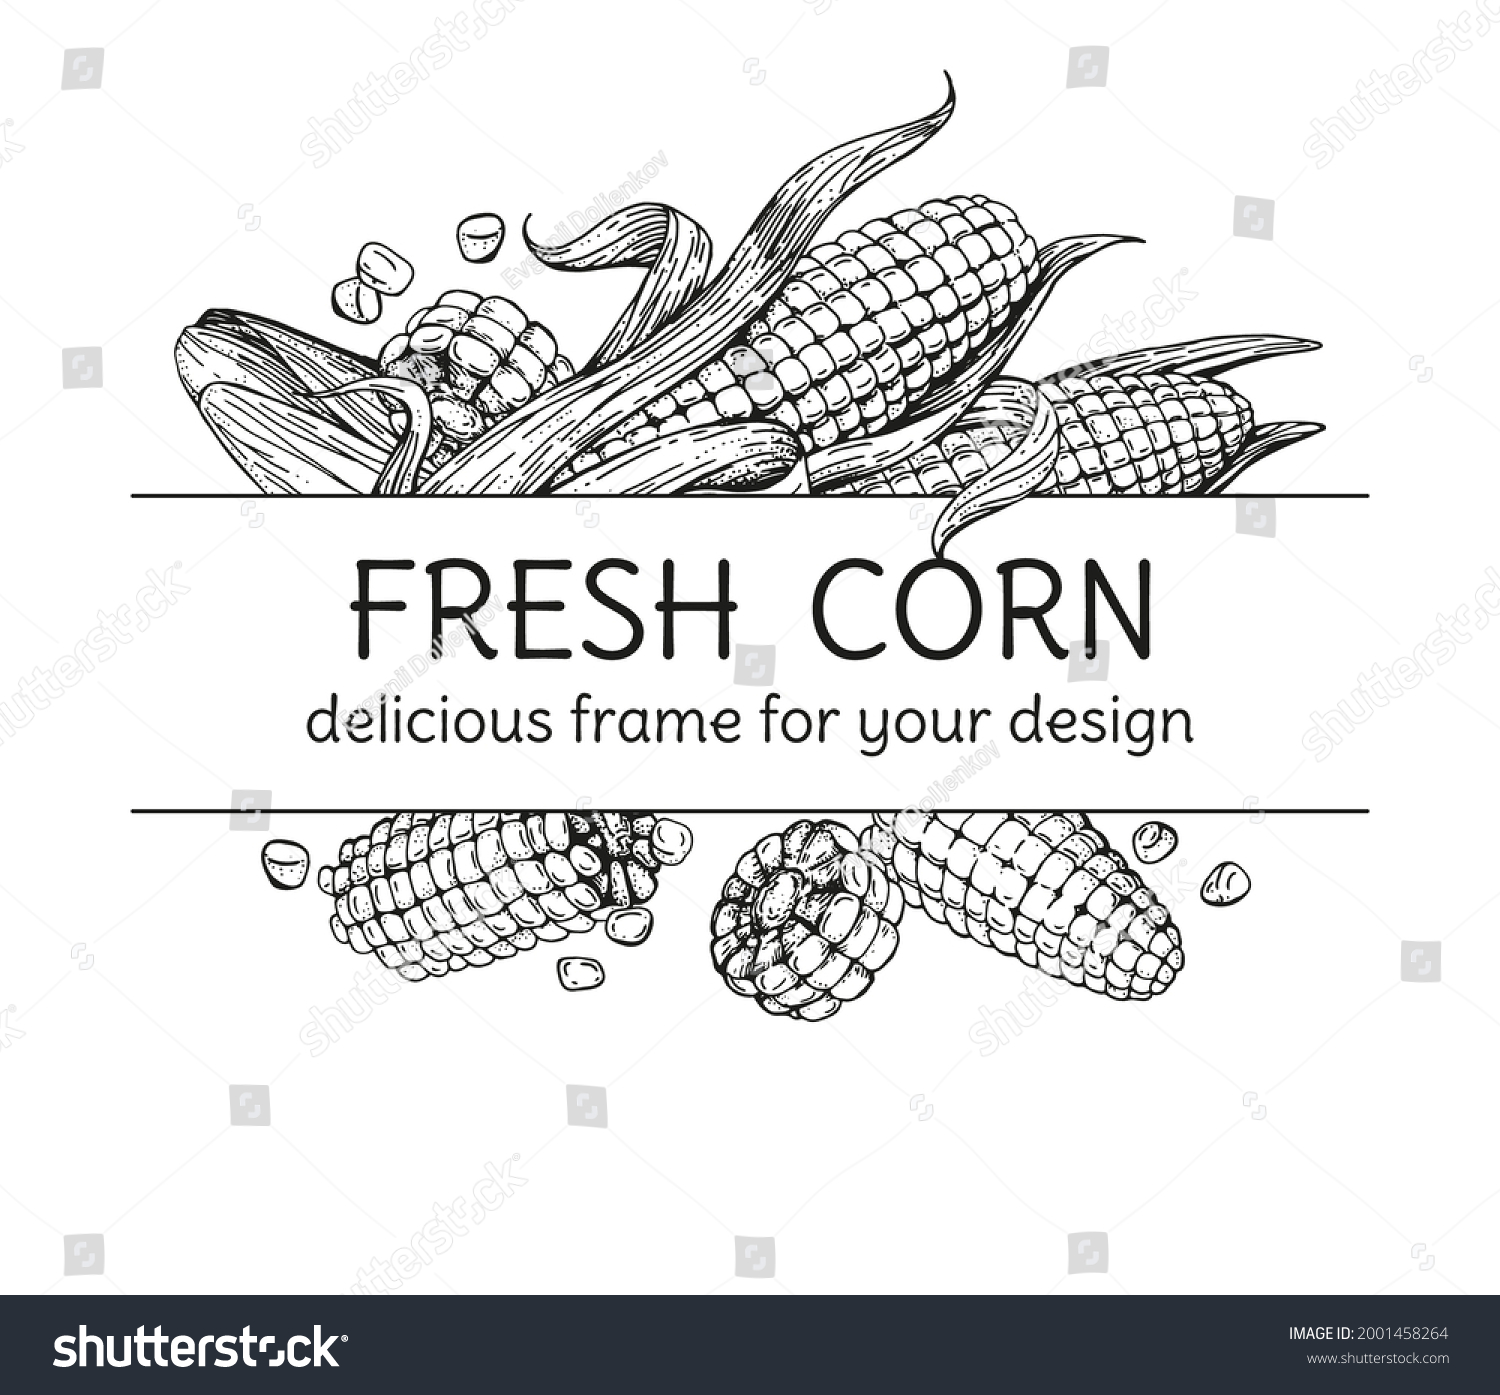 Vector text frame with corn cobs. Hand-drawn sketches engraving style. Unpeeled fruits and grains. For packaging design, menu, recipe pages. Vintage illustration on white background #2001458264